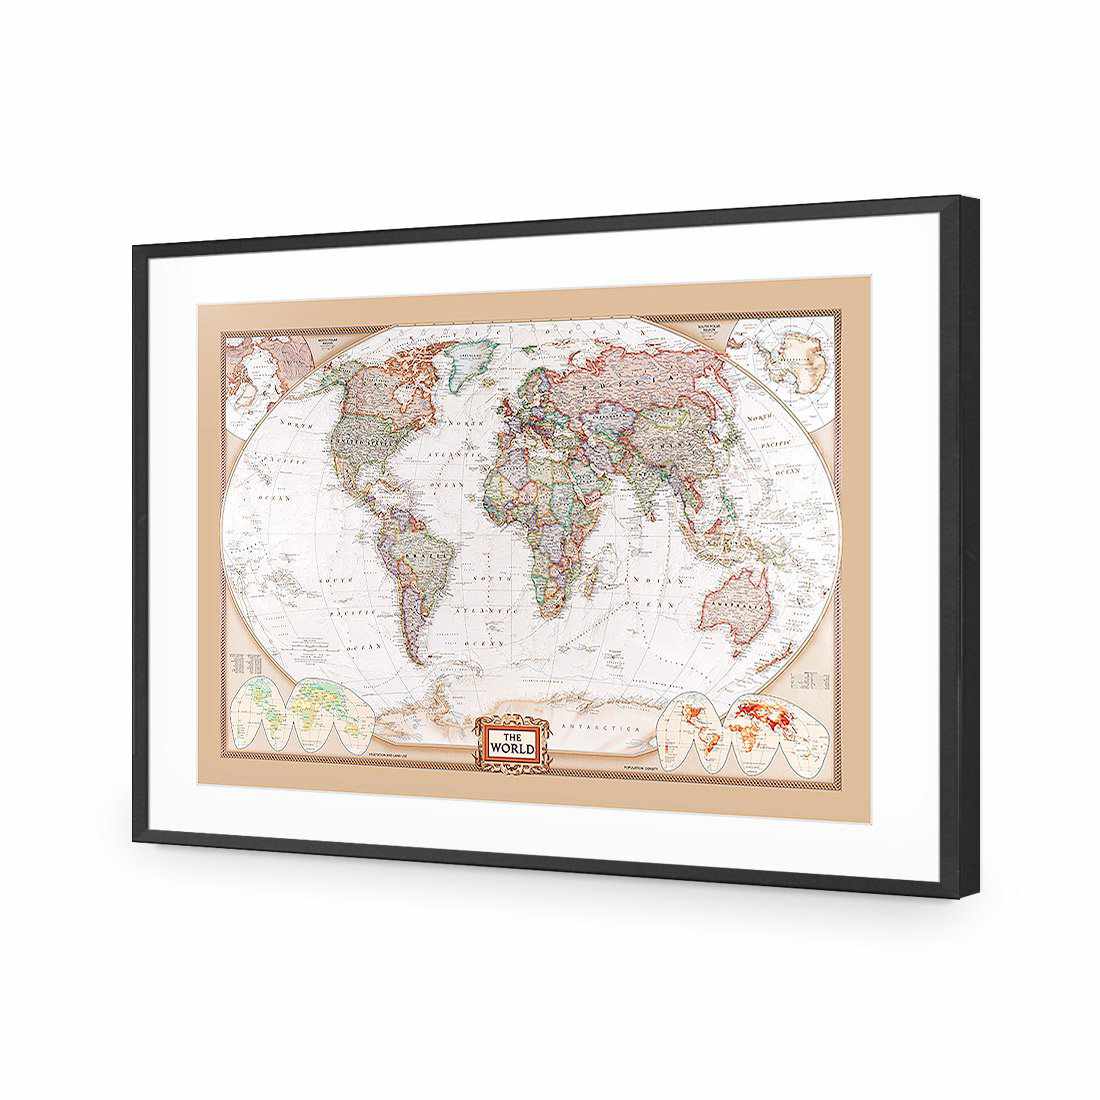 The World Map-Acrylic-Wall Art Design-With Border-Acrylic - Black Frame-45x30cm-Wall Art Designs